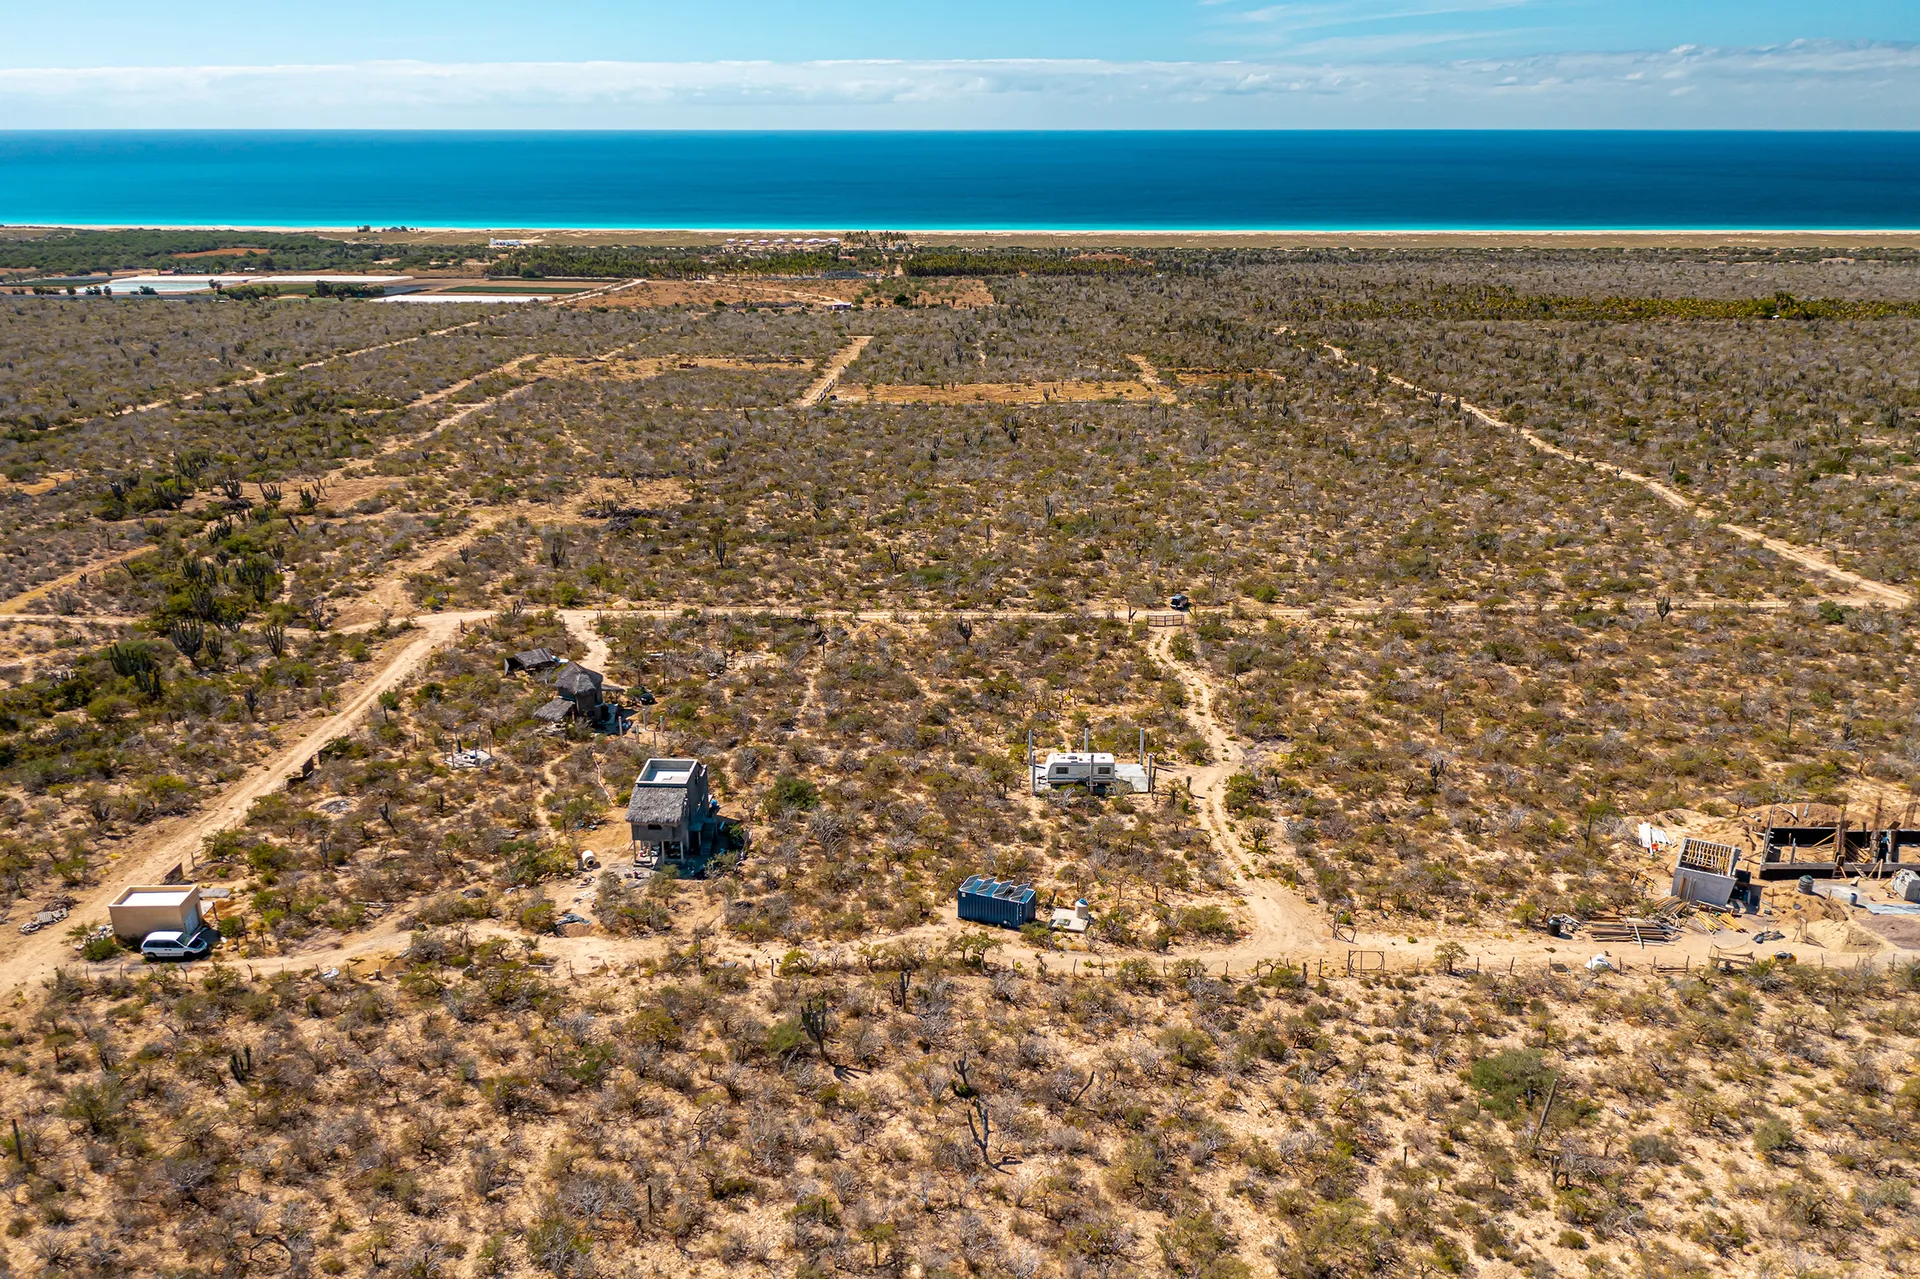 Build your dream home on this spacious 5000m2 lot located in the up-and-coming neighborhood of Las Playitas. Infrastructure in place and ready to build.